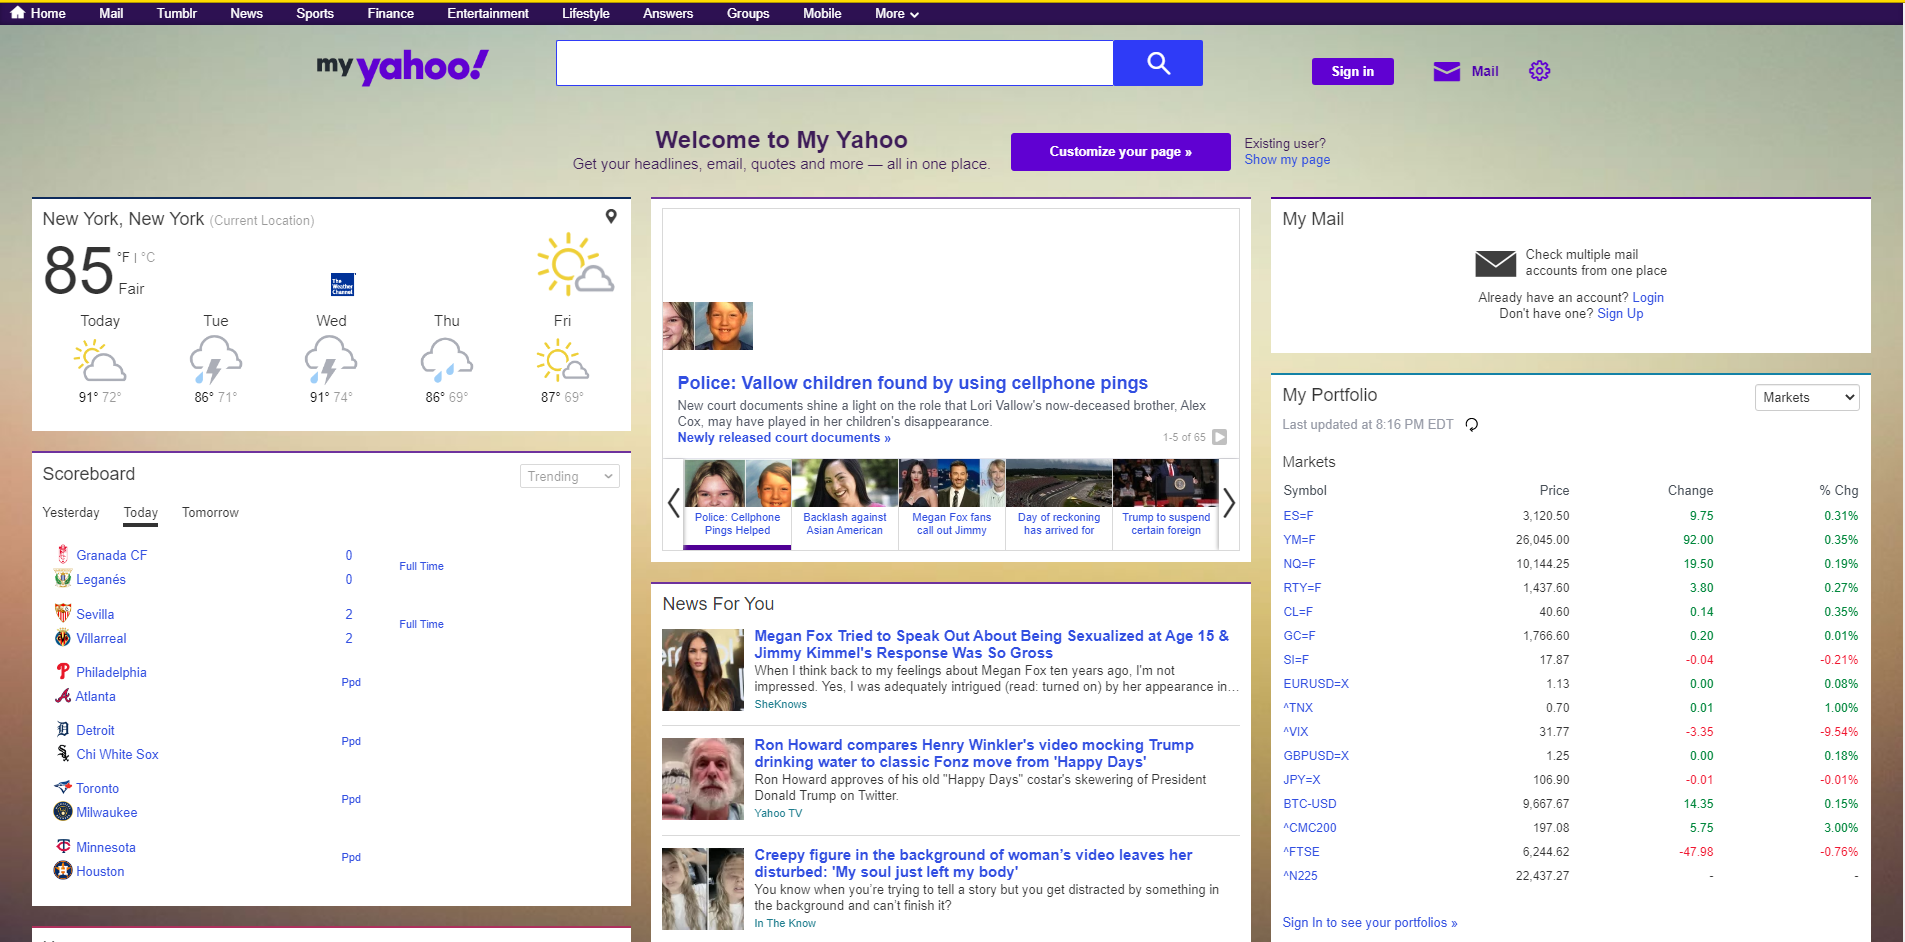 Yahoo homepage redesign overview